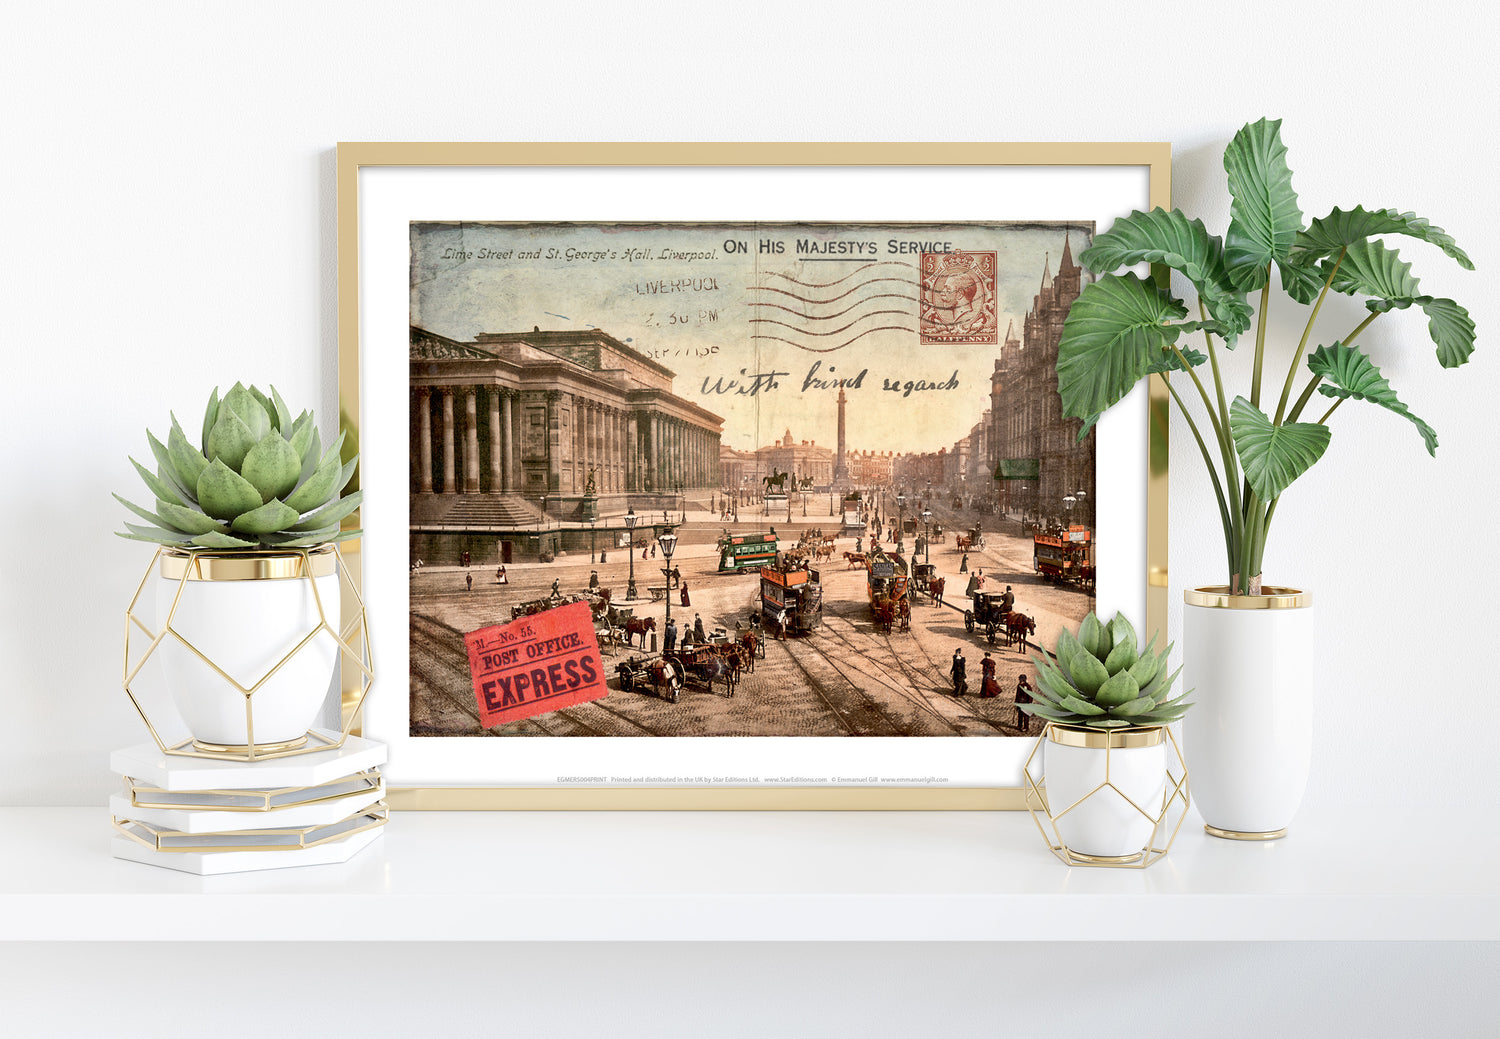 Lime Street and St Georges Hall, Liverpool - Art Print